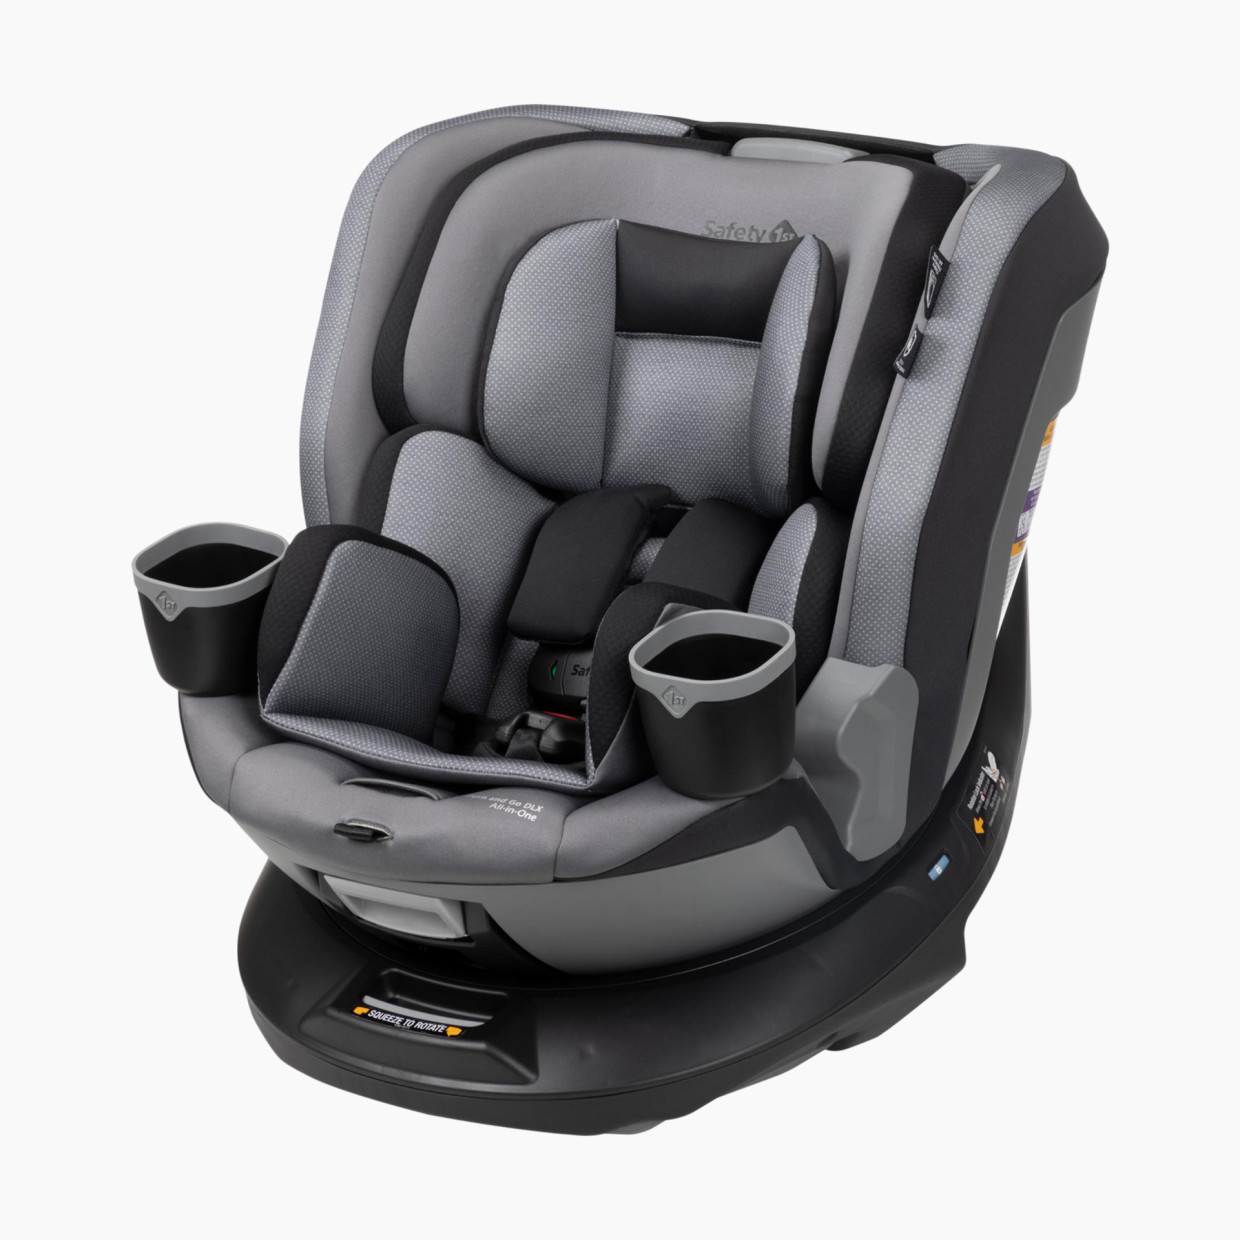 Safety 1st Turn and Go 360 DLX All-in-One Convertible Car Seat - High Street.